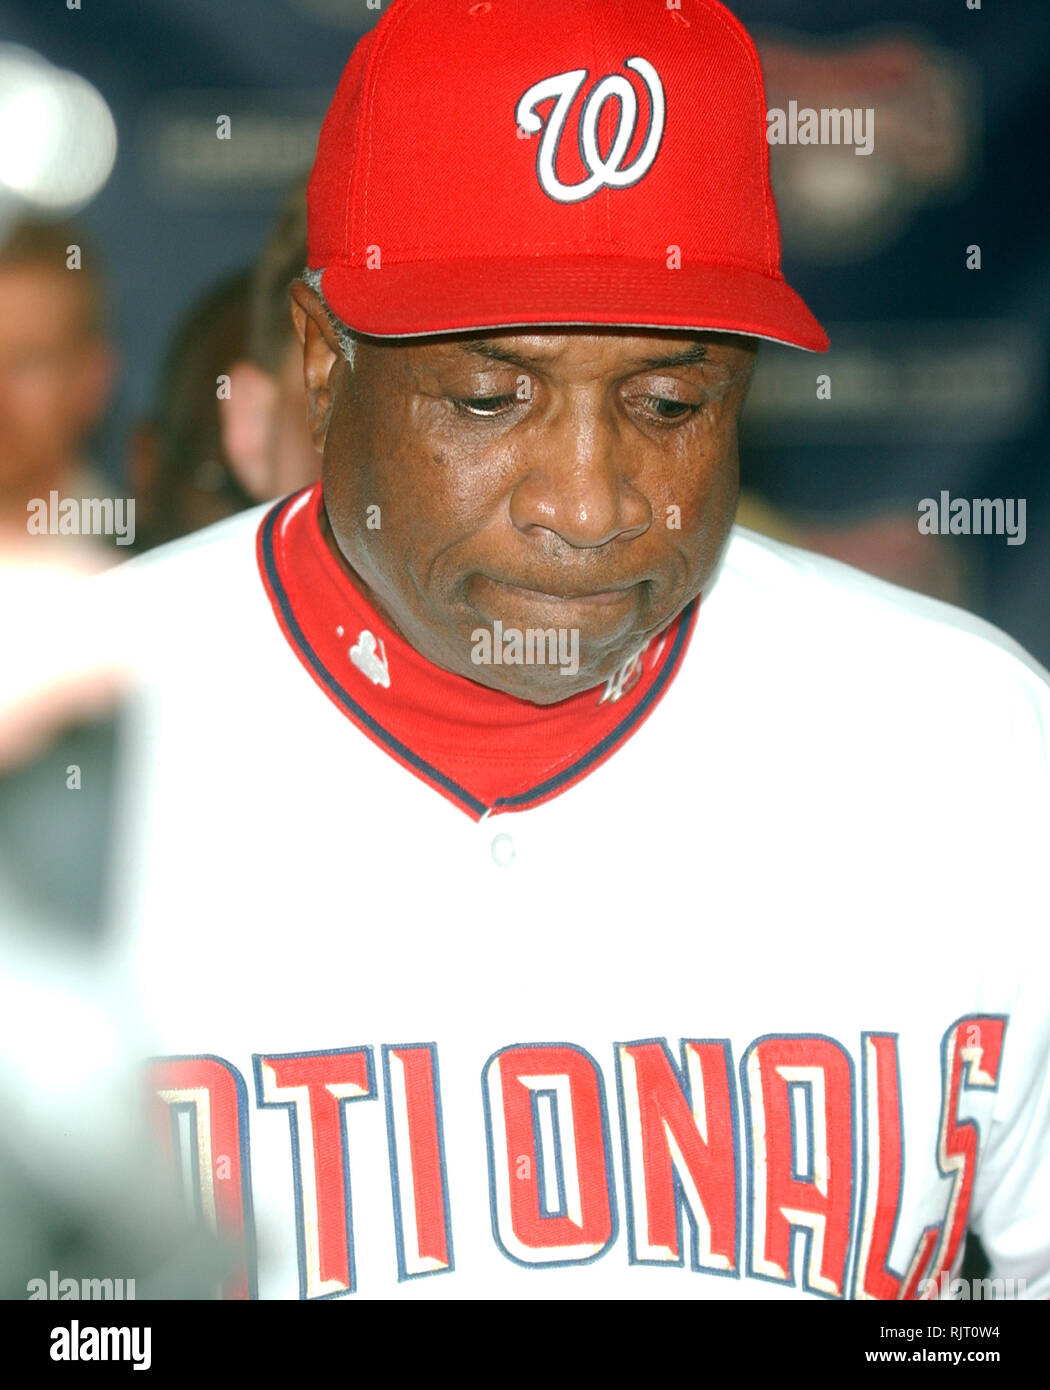 September 30, 2006 - Washington, District of Columbia, U.S. - Washington, D.C. - September 30, 2006 -- Frank Robinson departs the press conference announcing he will not return as manager of the Washington Nationals in 2007 at RFK Stadium in Washington, D.C. on September 30, 2006. (Credit Image: © Ron Sachs/CNP via ZUMA Wire) Stock Photo